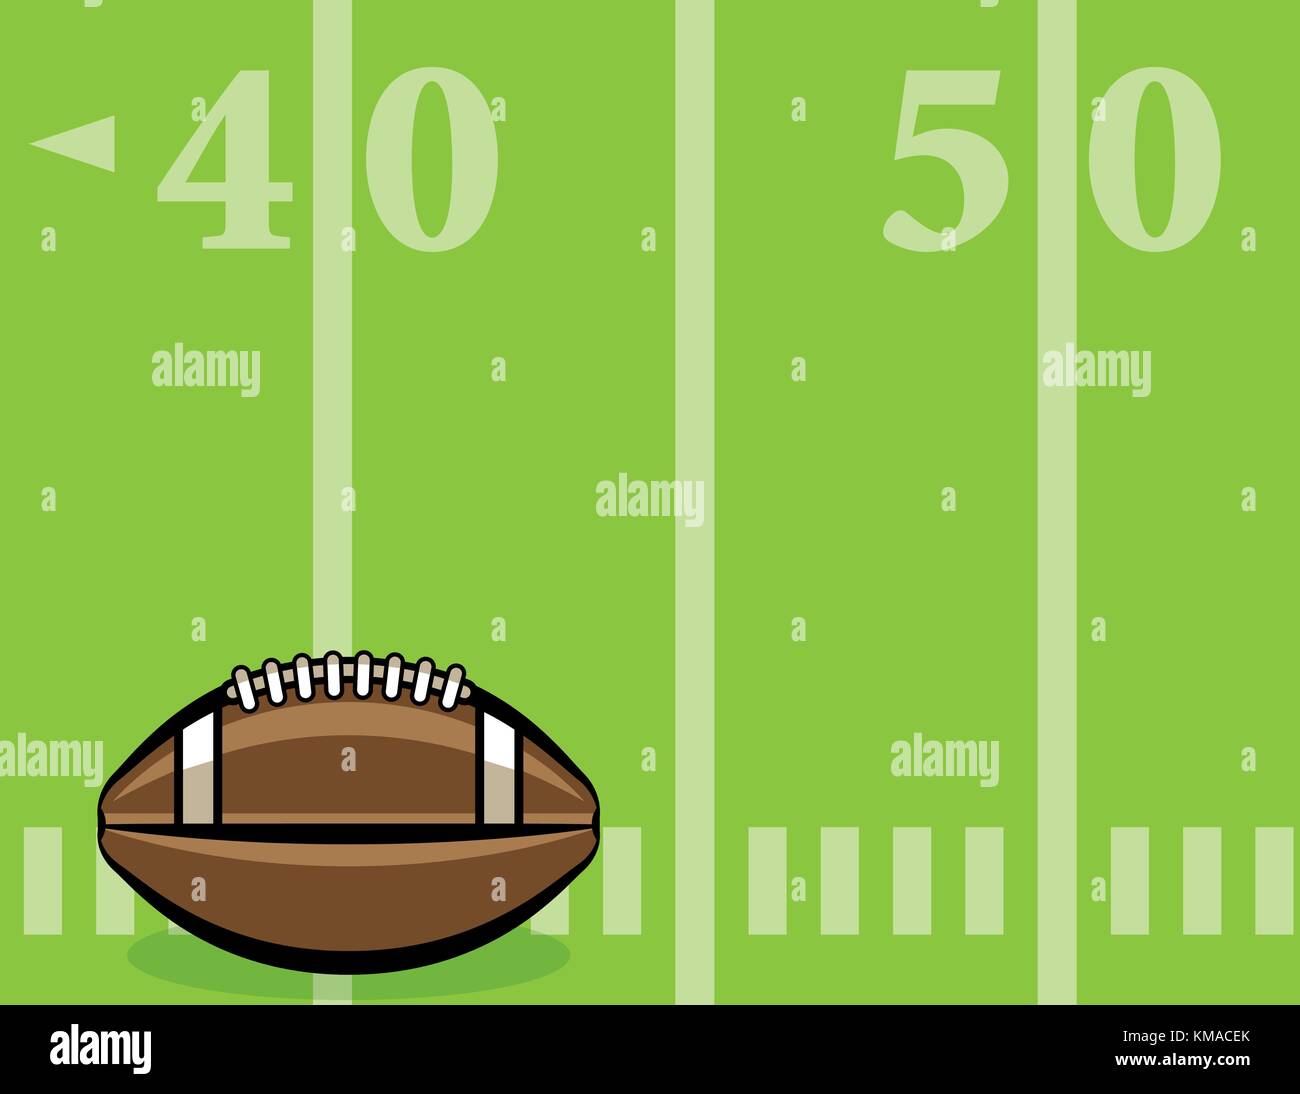 An American football sitting on a lined field background illustration. Vector EPS 10 available. Stock Vector